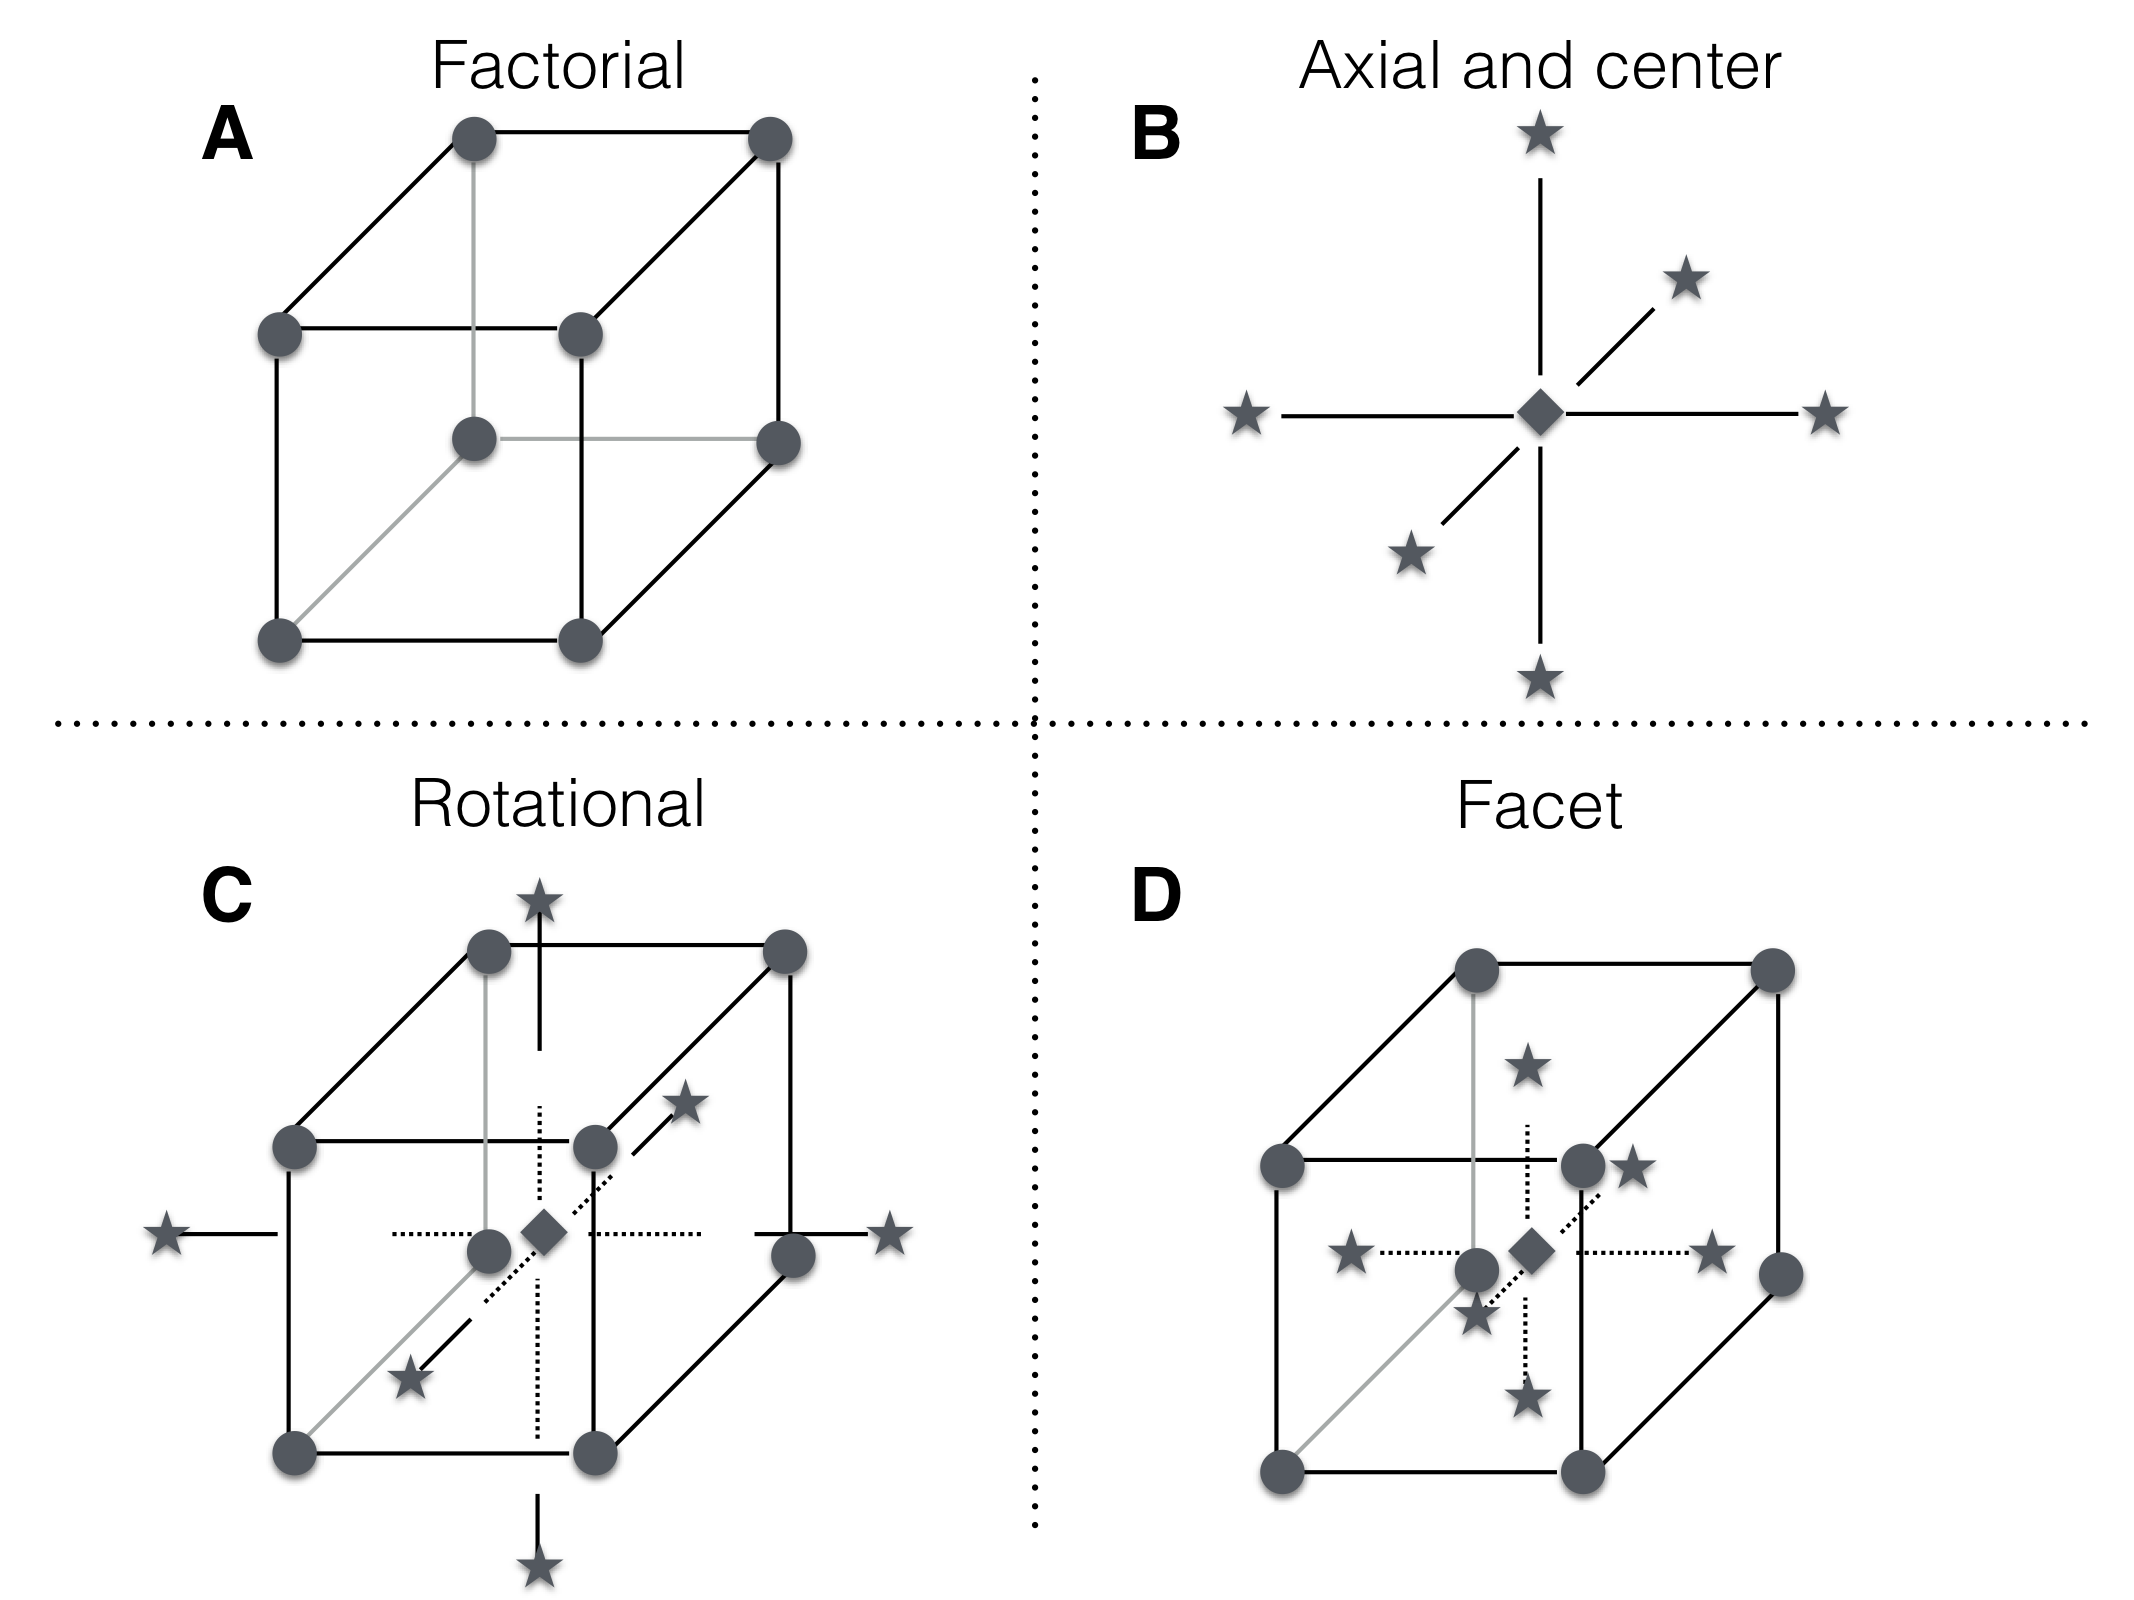 A center composite design for three factors. A: design points for $2^3$ full factorial. B: center point location and axial points chosen along axis parallel to coordinate axis and through center point. C: combined design points yield center composite design, here with axis points chosen for rotatability and thus outside the cube. D: combined design points with axial points chosen on facets introduce no new factor levels.